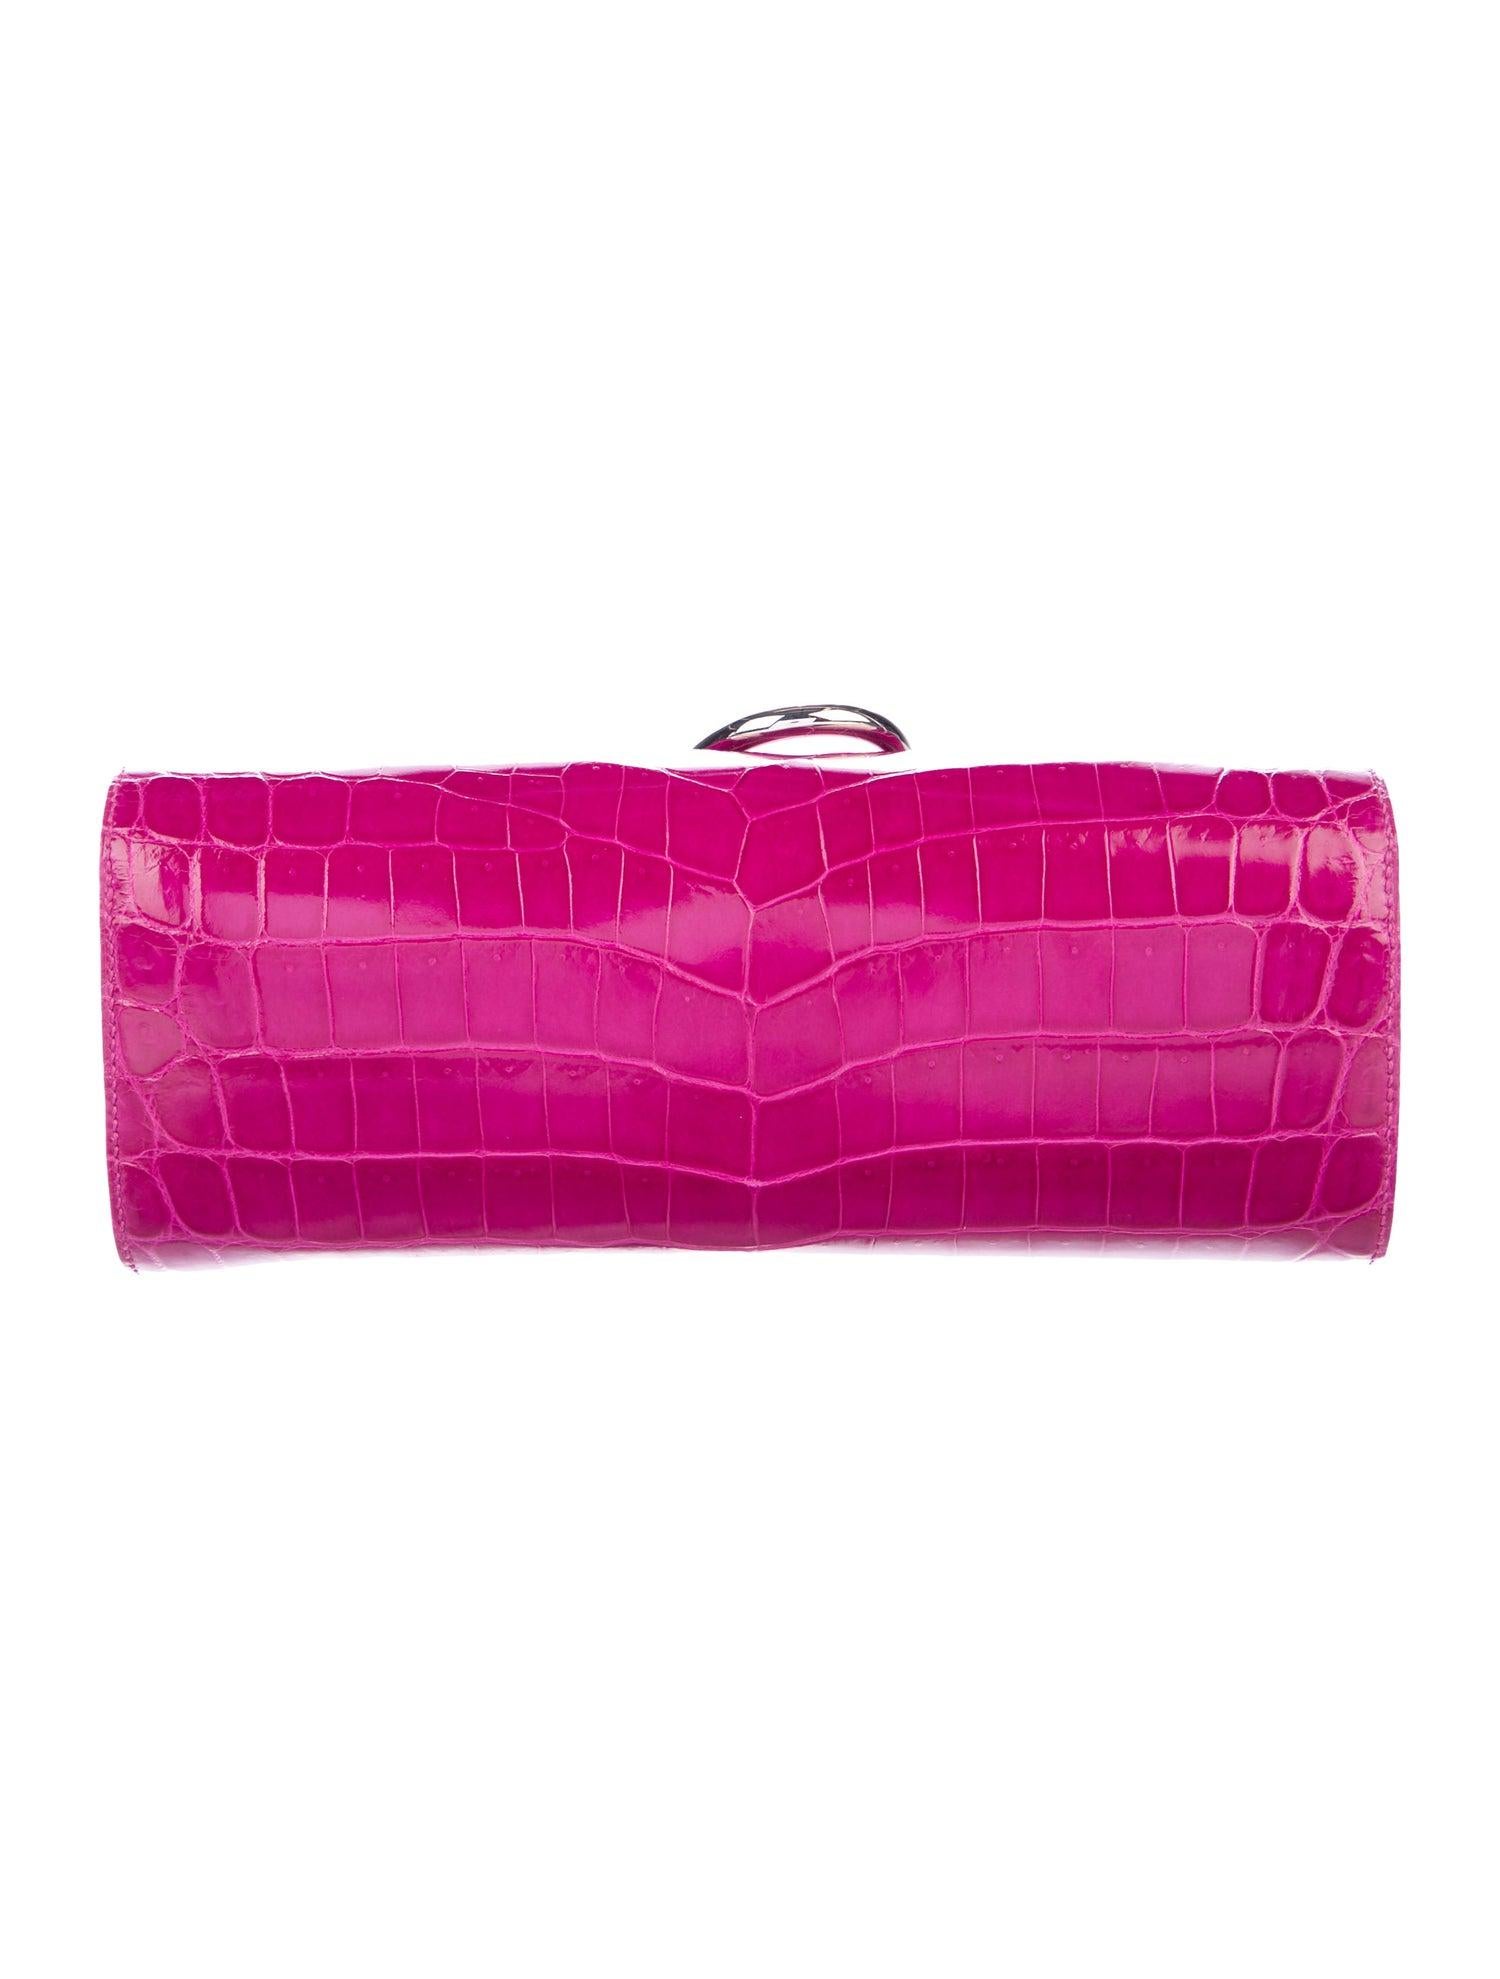 Hermes NEW Magenta Pink Crocodile Exotic Leather Palladium Egee Clutch Flap Bag in Box

Crocodile
Palladium-plated hardware
Leather lining
Magnetic closure
Measures 10